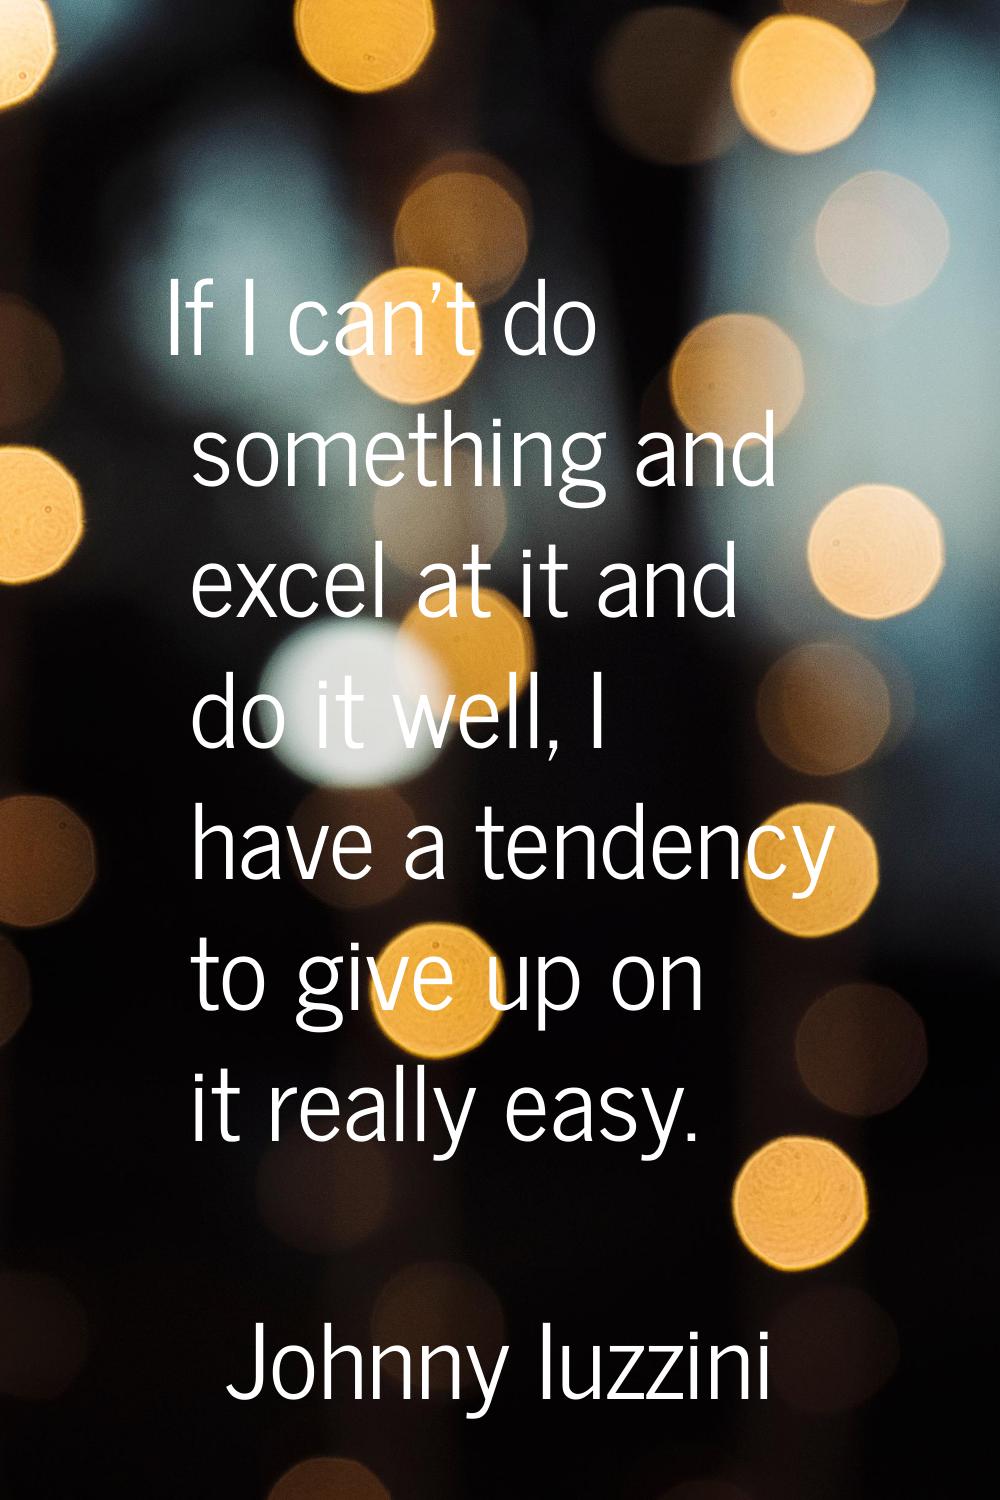 If I can't do something and excel at it and do it well, I have a tendency to give up on it really e